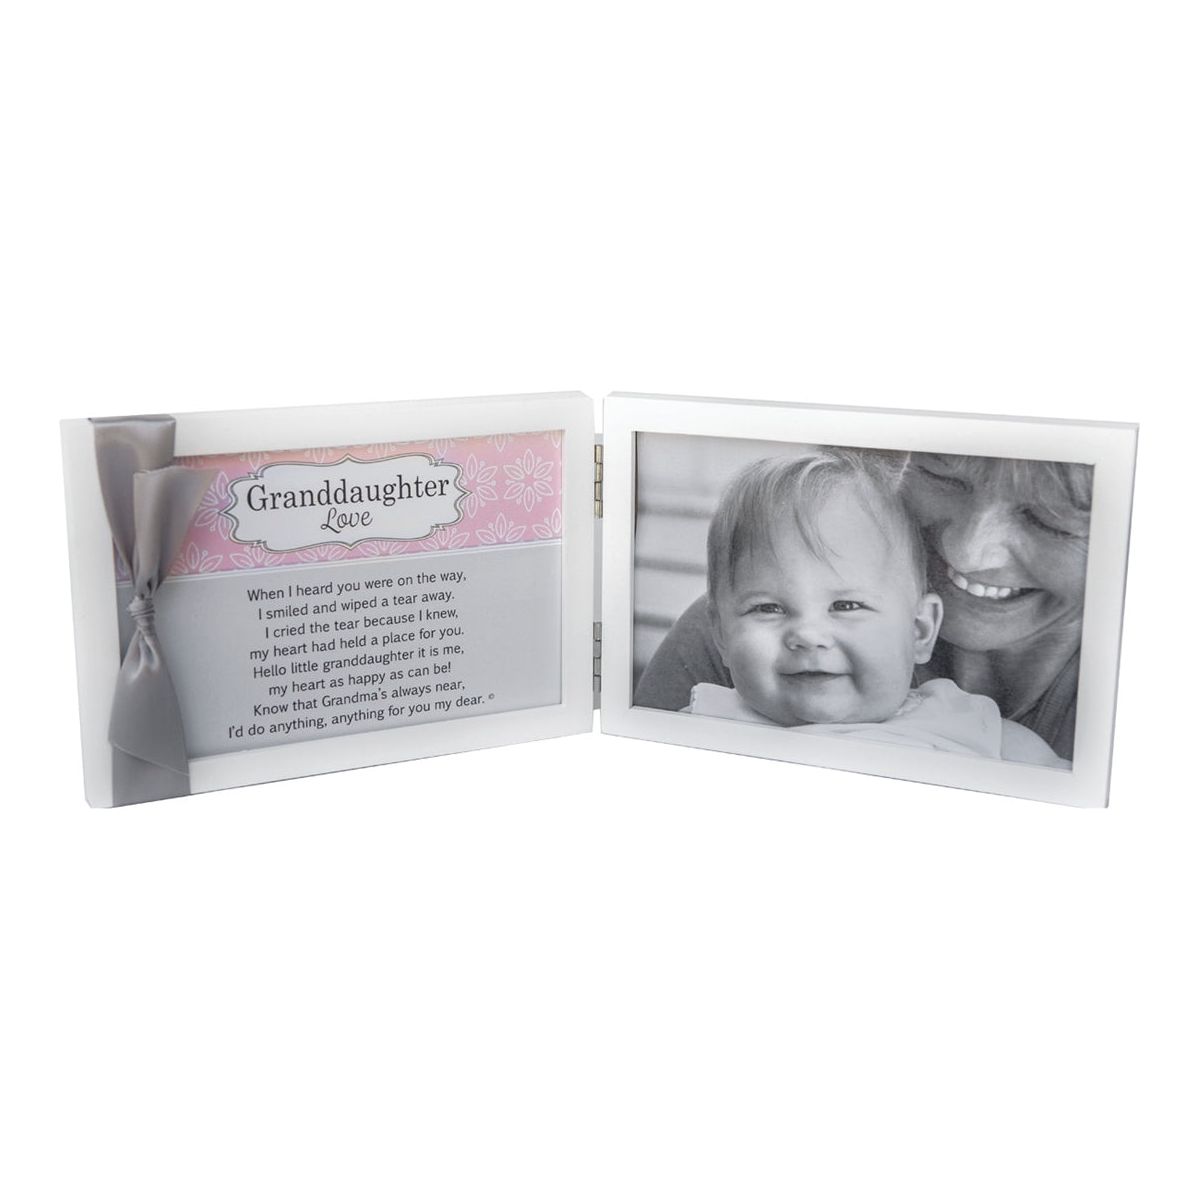 Little Granddaughter Picture Frame 4x6